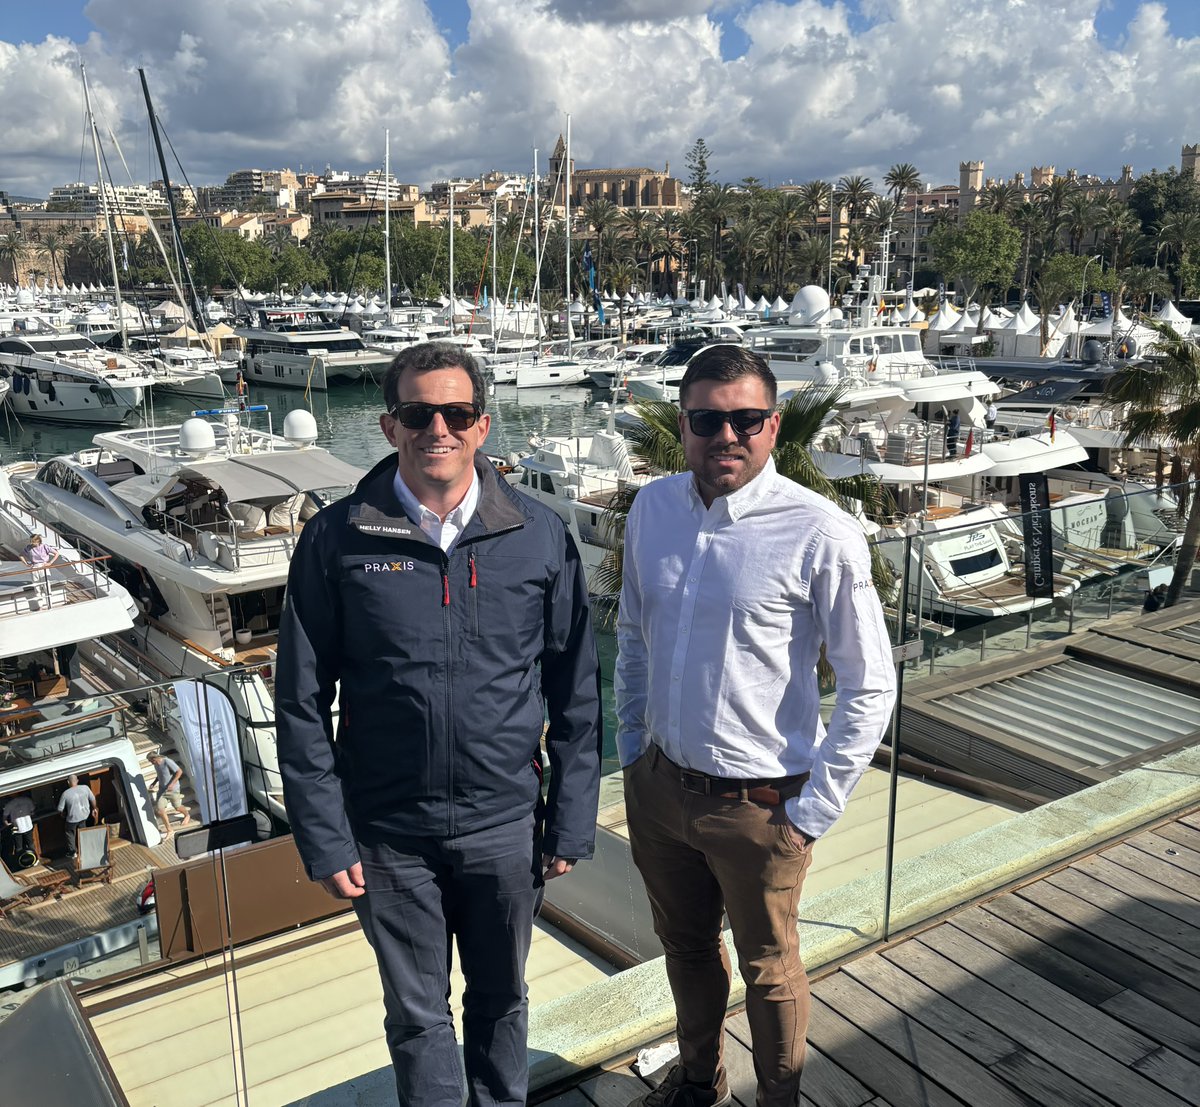 Jordon and Giles from our Yacht Services team are attending the Palma International Boat Show this week – a special one this year as the event marks its 40th anniversary.

Please get in touch 👇 to arrange a chat

#palmainternationalboatshow #yachtservices #PIBS24